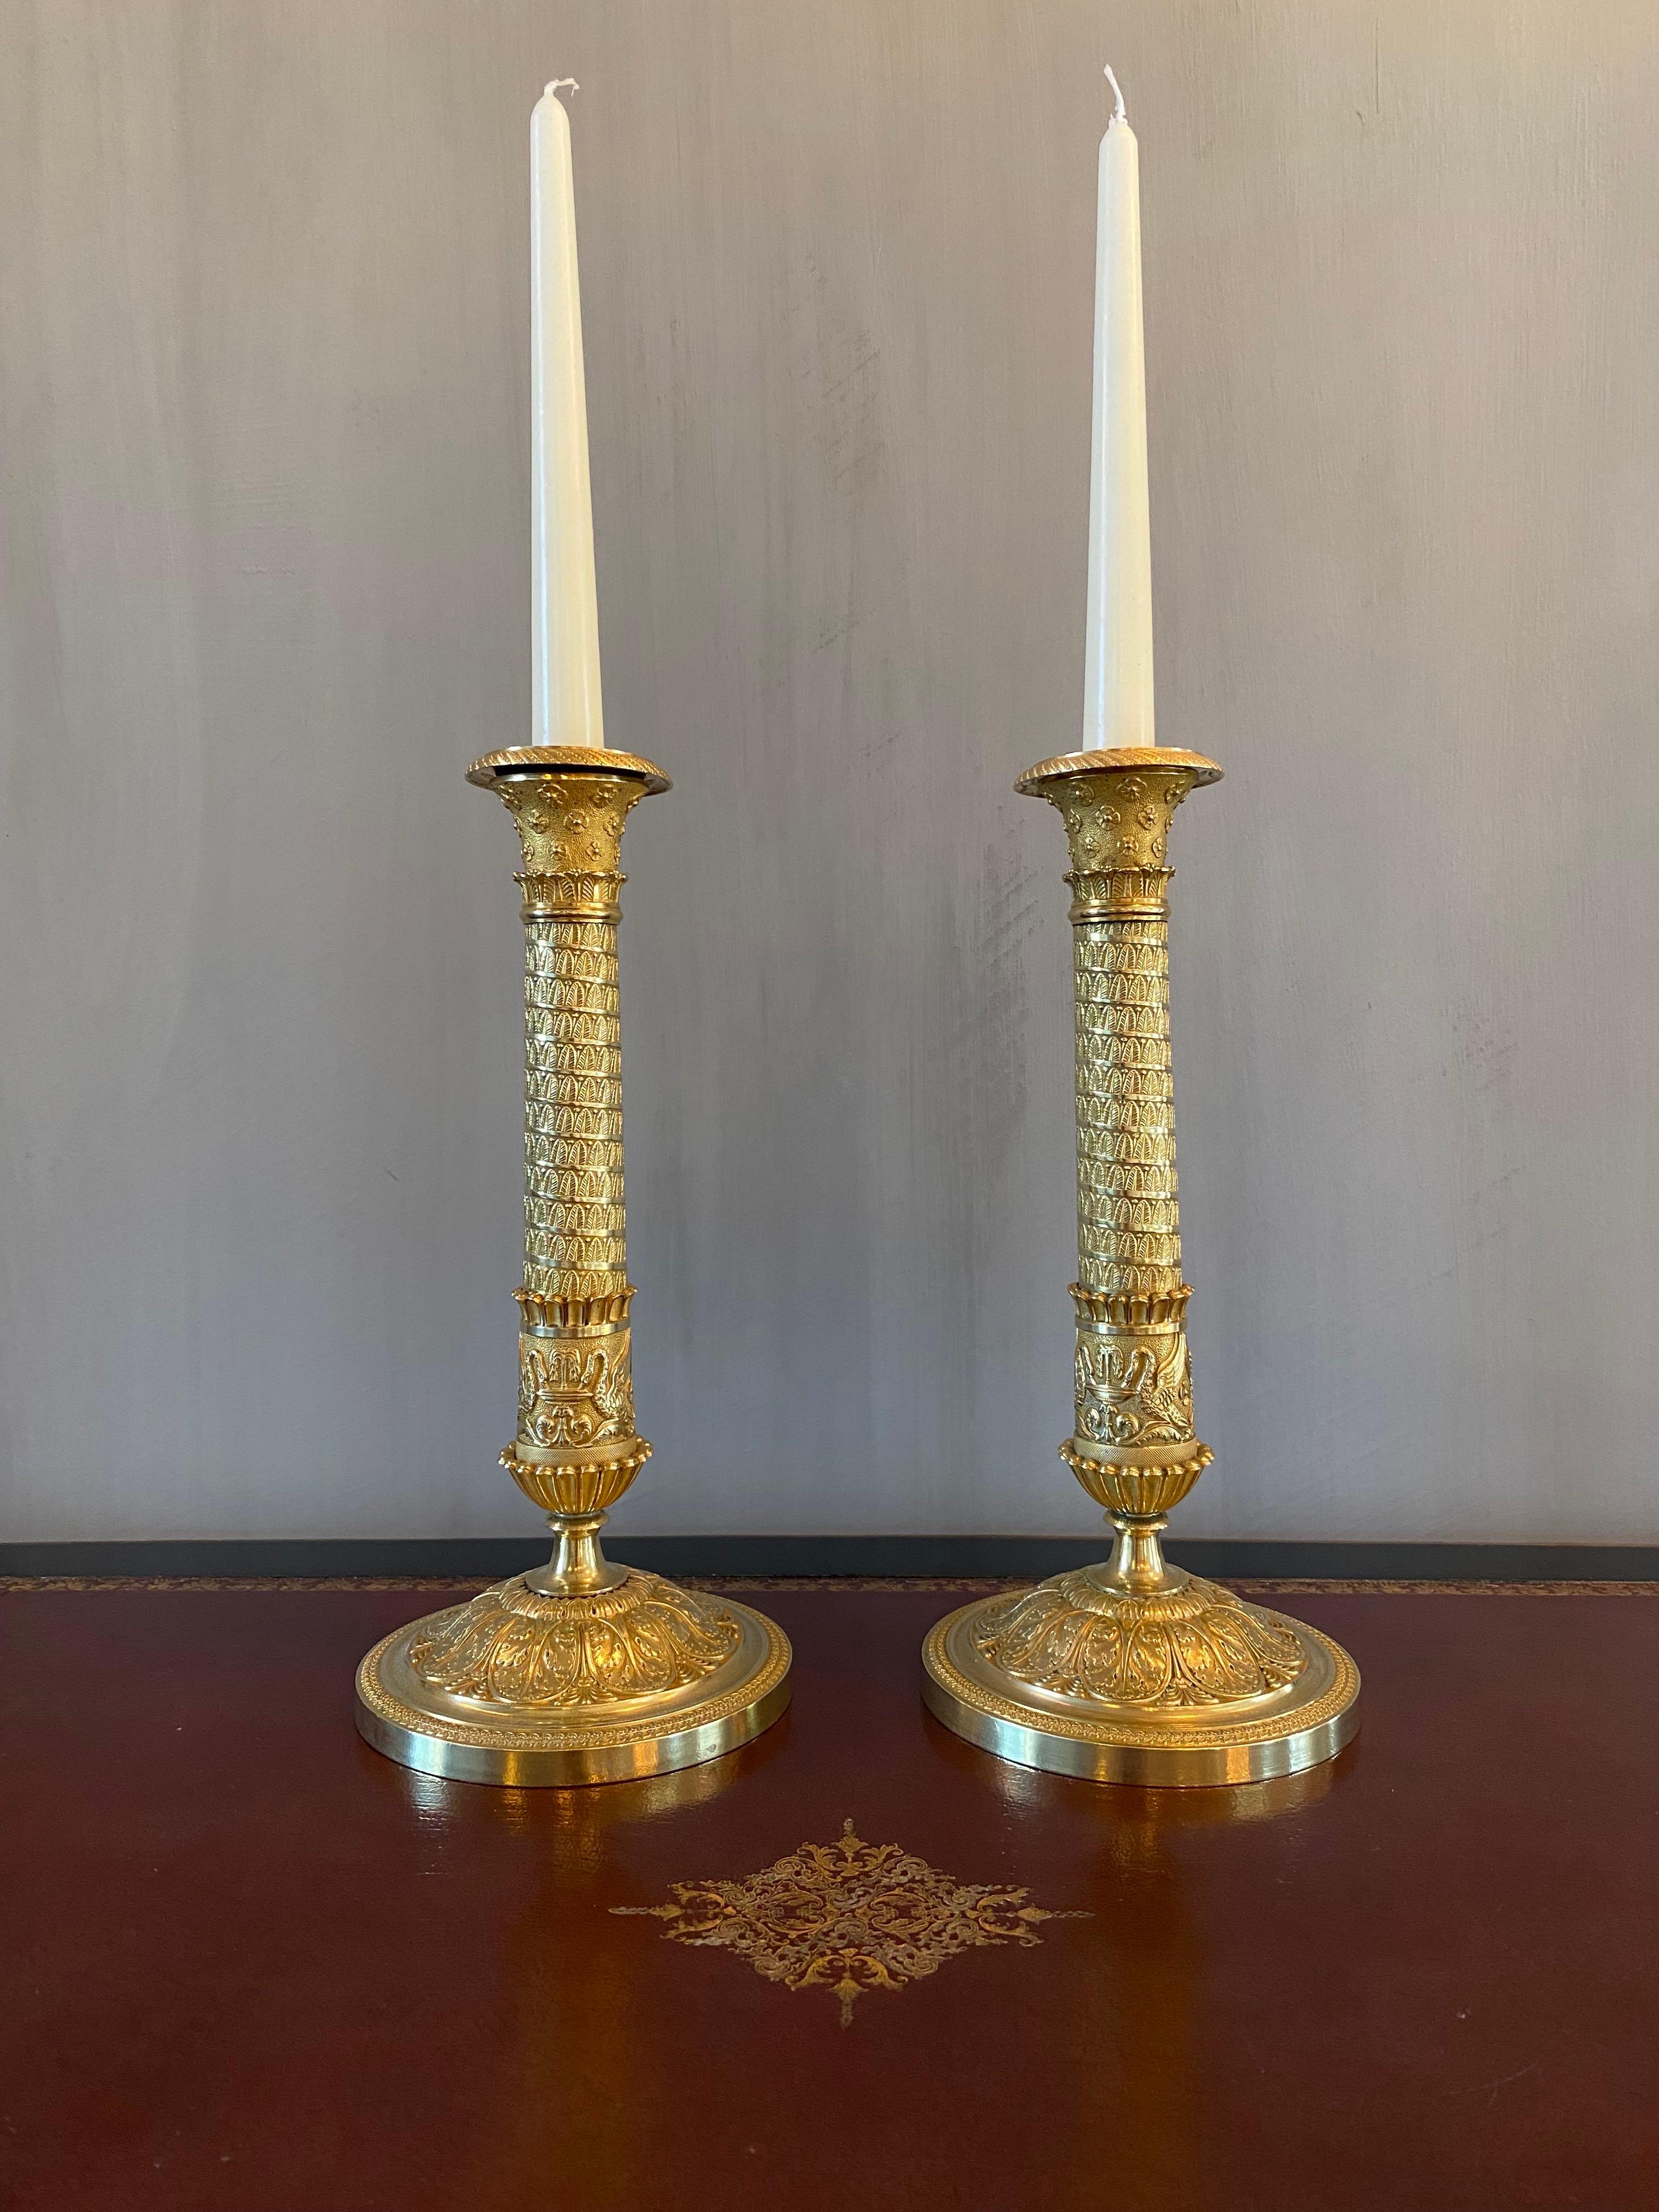 A fabulous and elegant large pair French candlesticks in gilt and chased bronze.
The central shafts in style of Trajan's column or the column of the place Vendôme in Paris, is decorated with frieze of palmettes and swans drinking in fountains ending